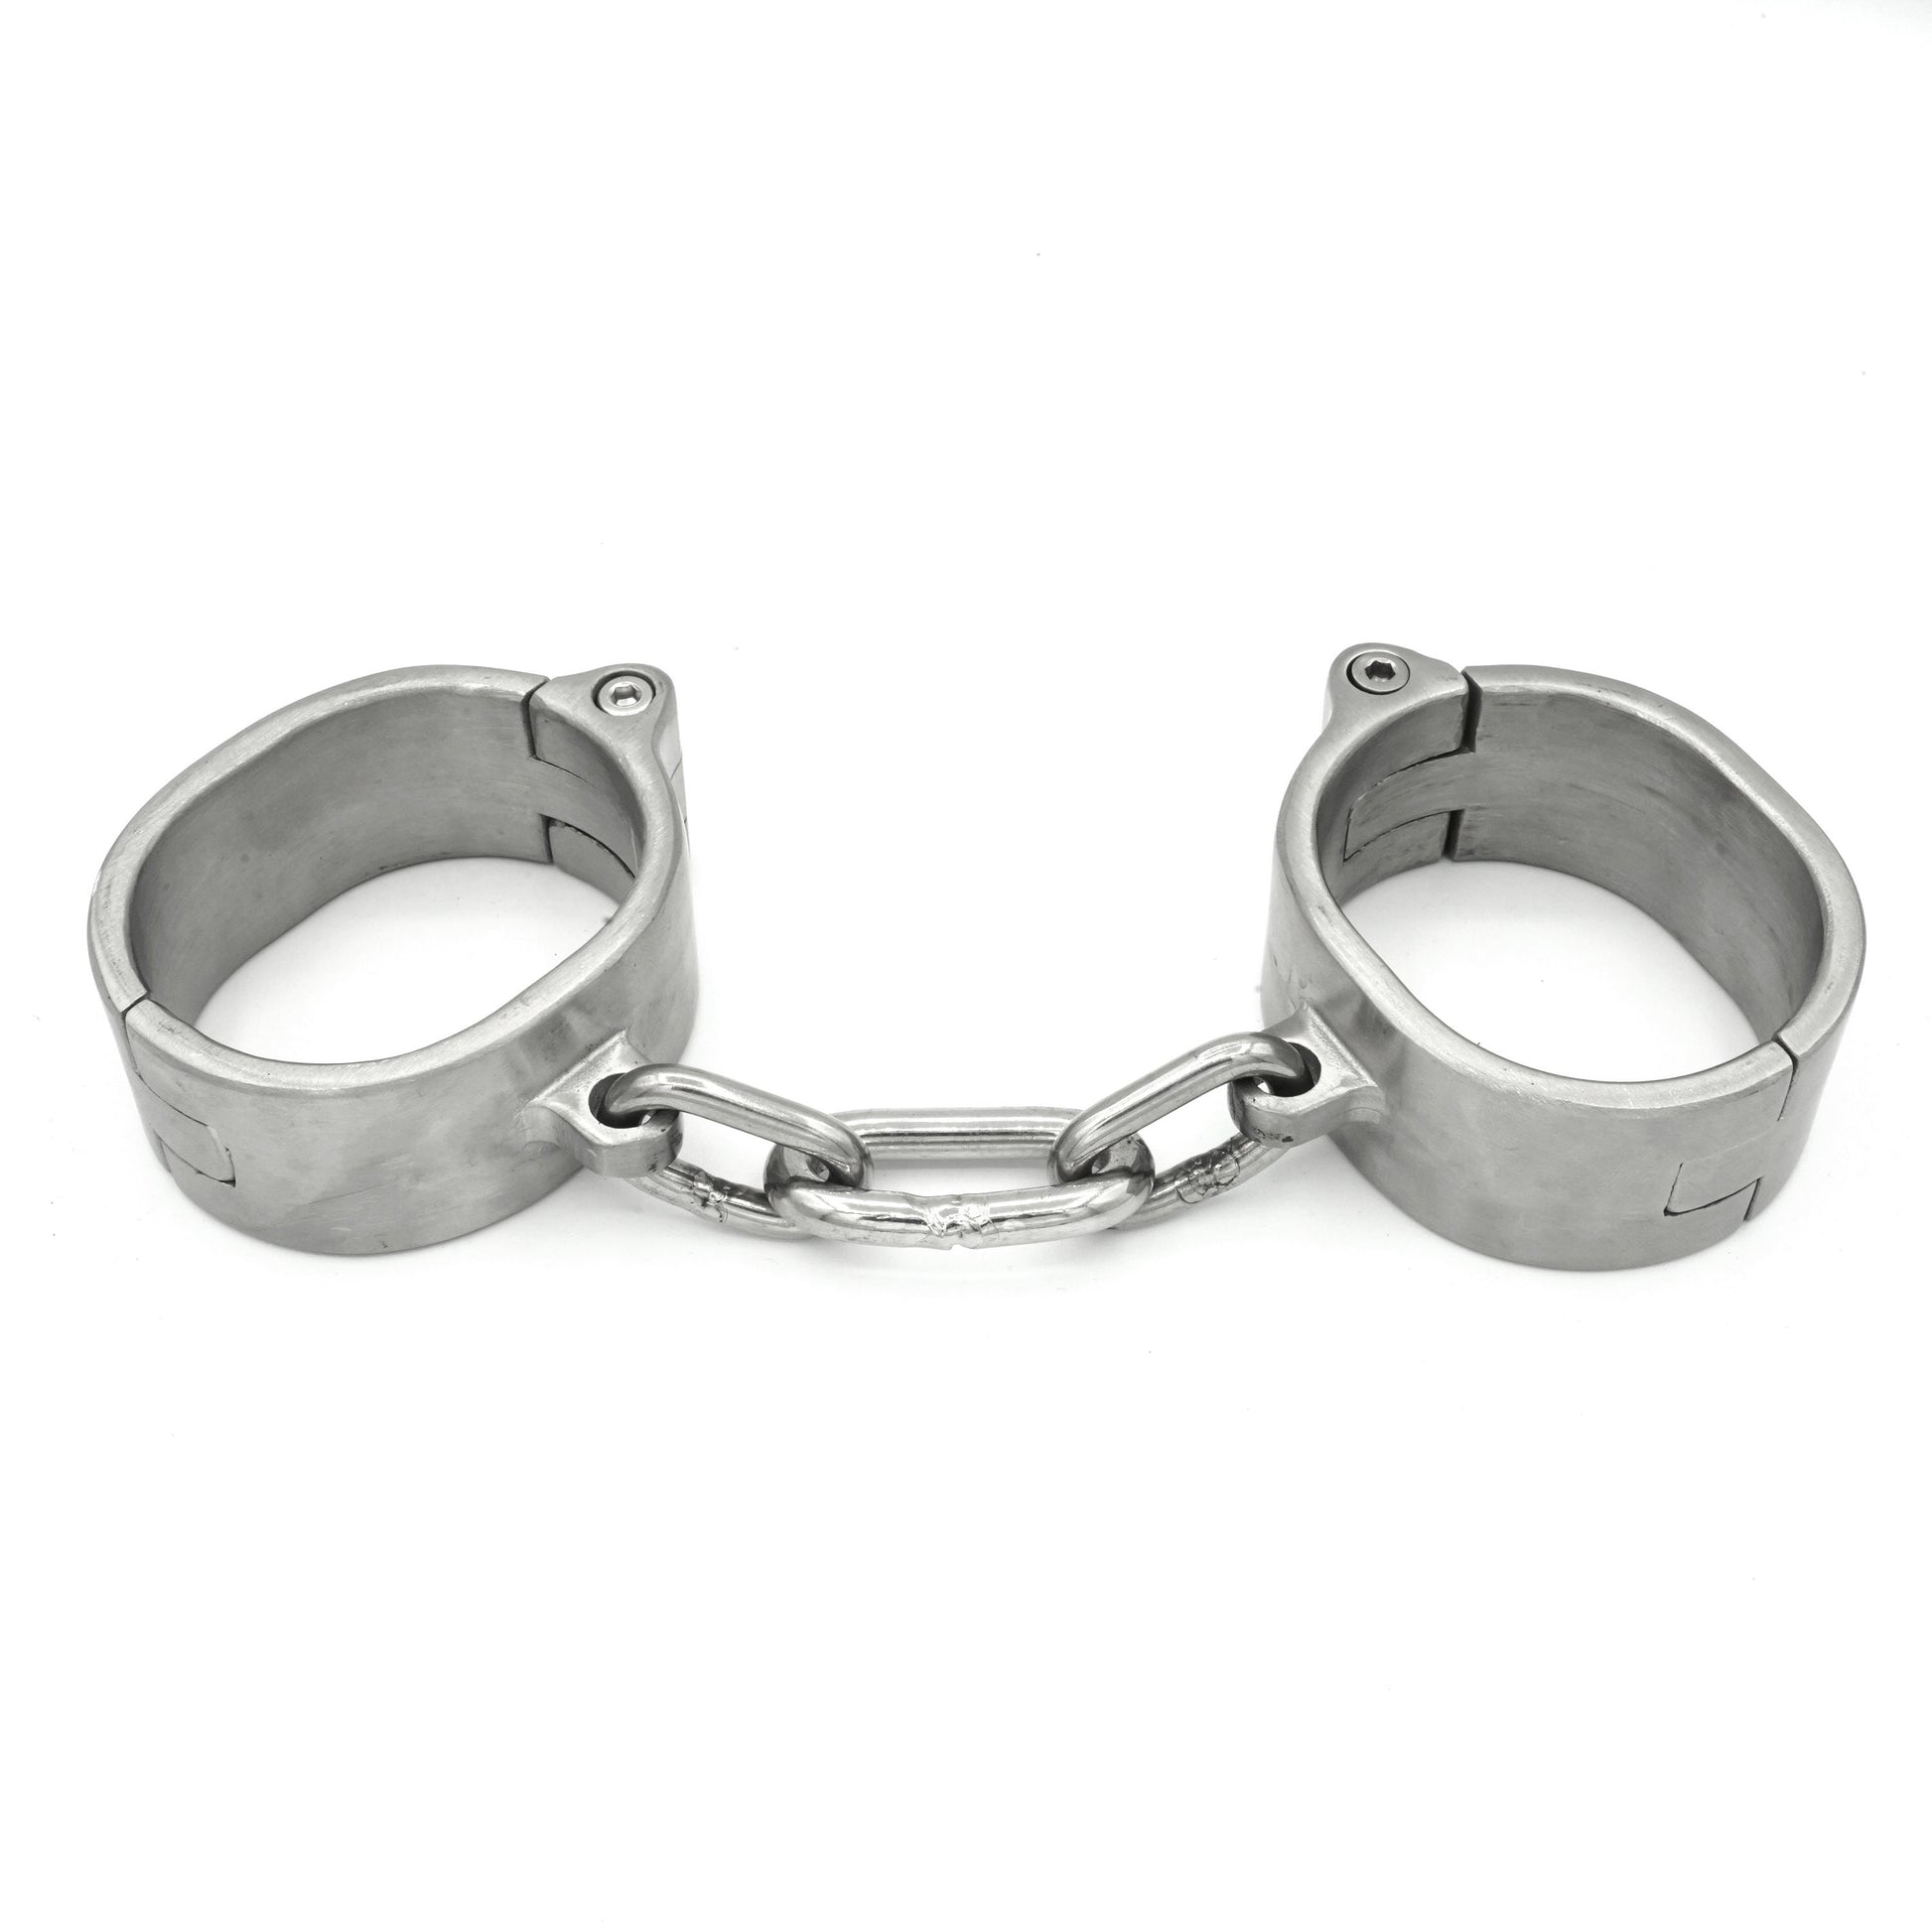 Solid stainless steel shackles with key lock and chain